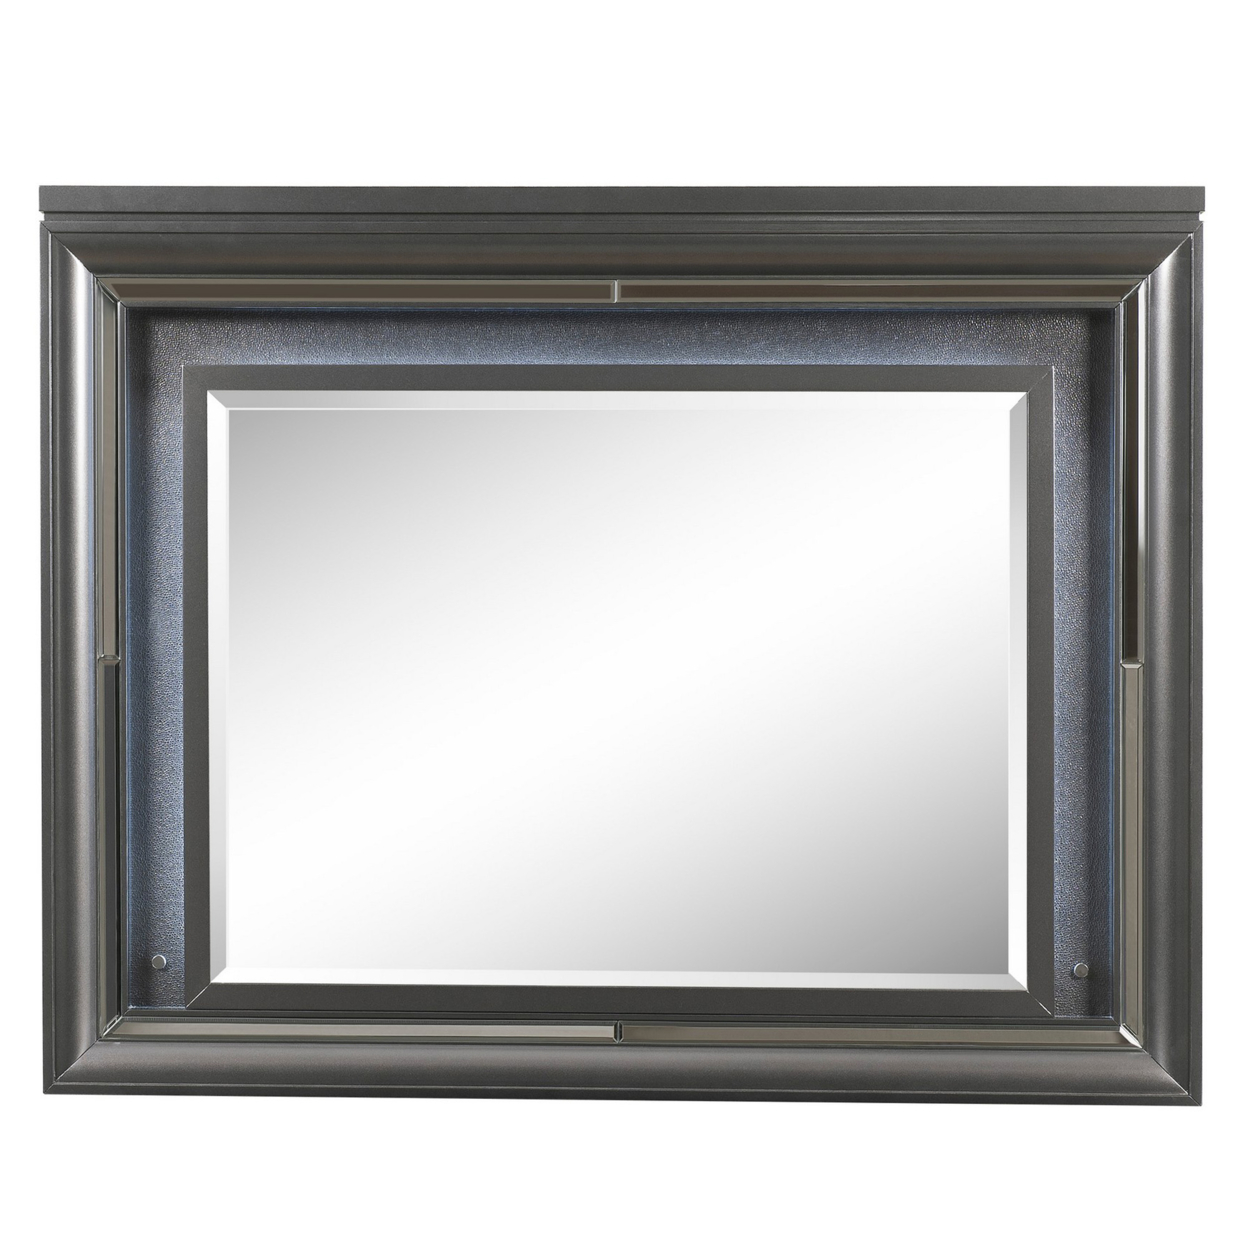 Wall Mirror With Mirror Accent And Beveled Edges, Gray- Saltoro Sherpi